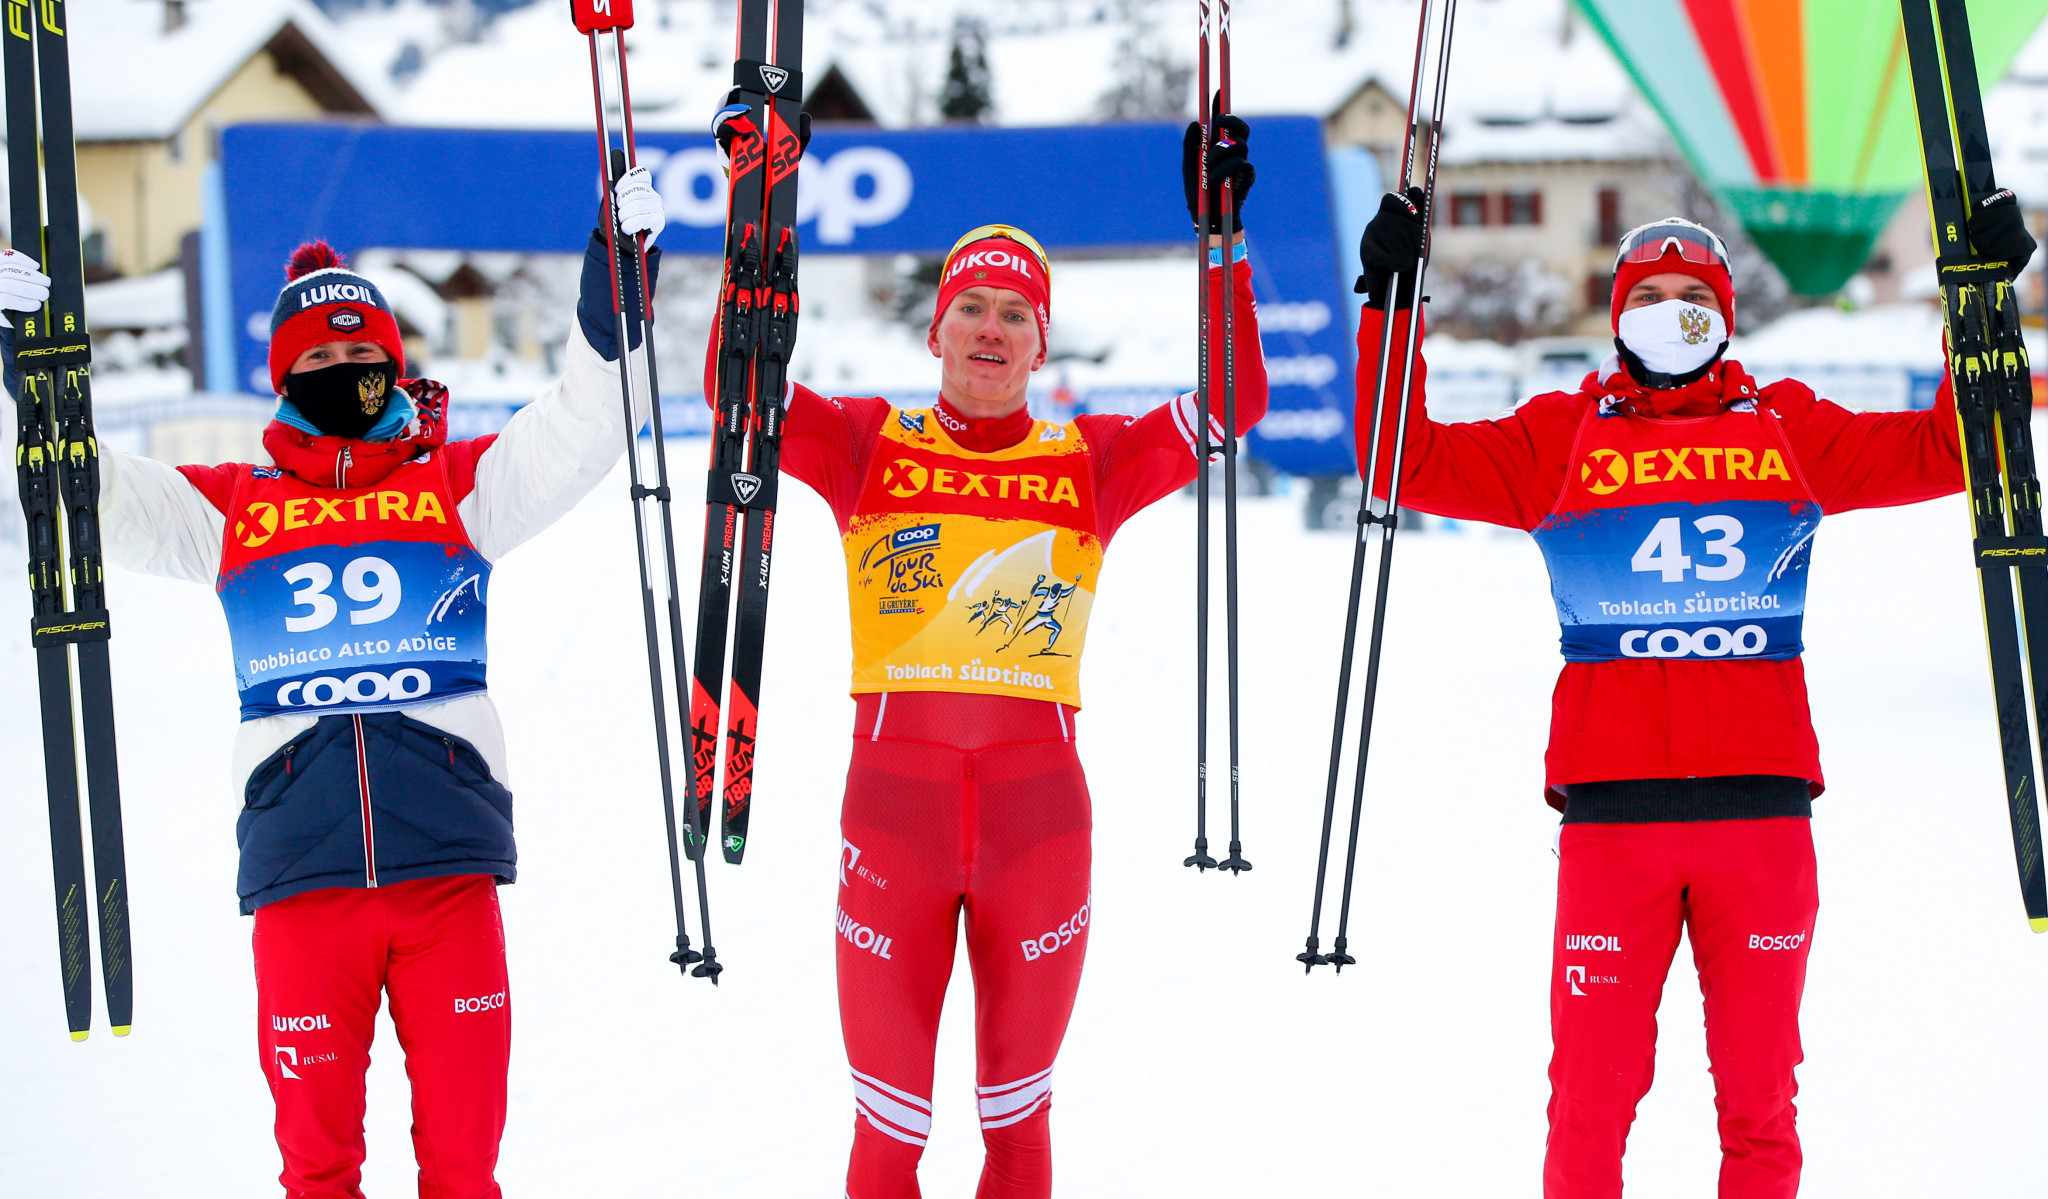 Alexander Bolshunov is flanked by compatriots Denis Spitsov and Ivan Yakimushkin after completing an all-Russian podium ©Getty Images